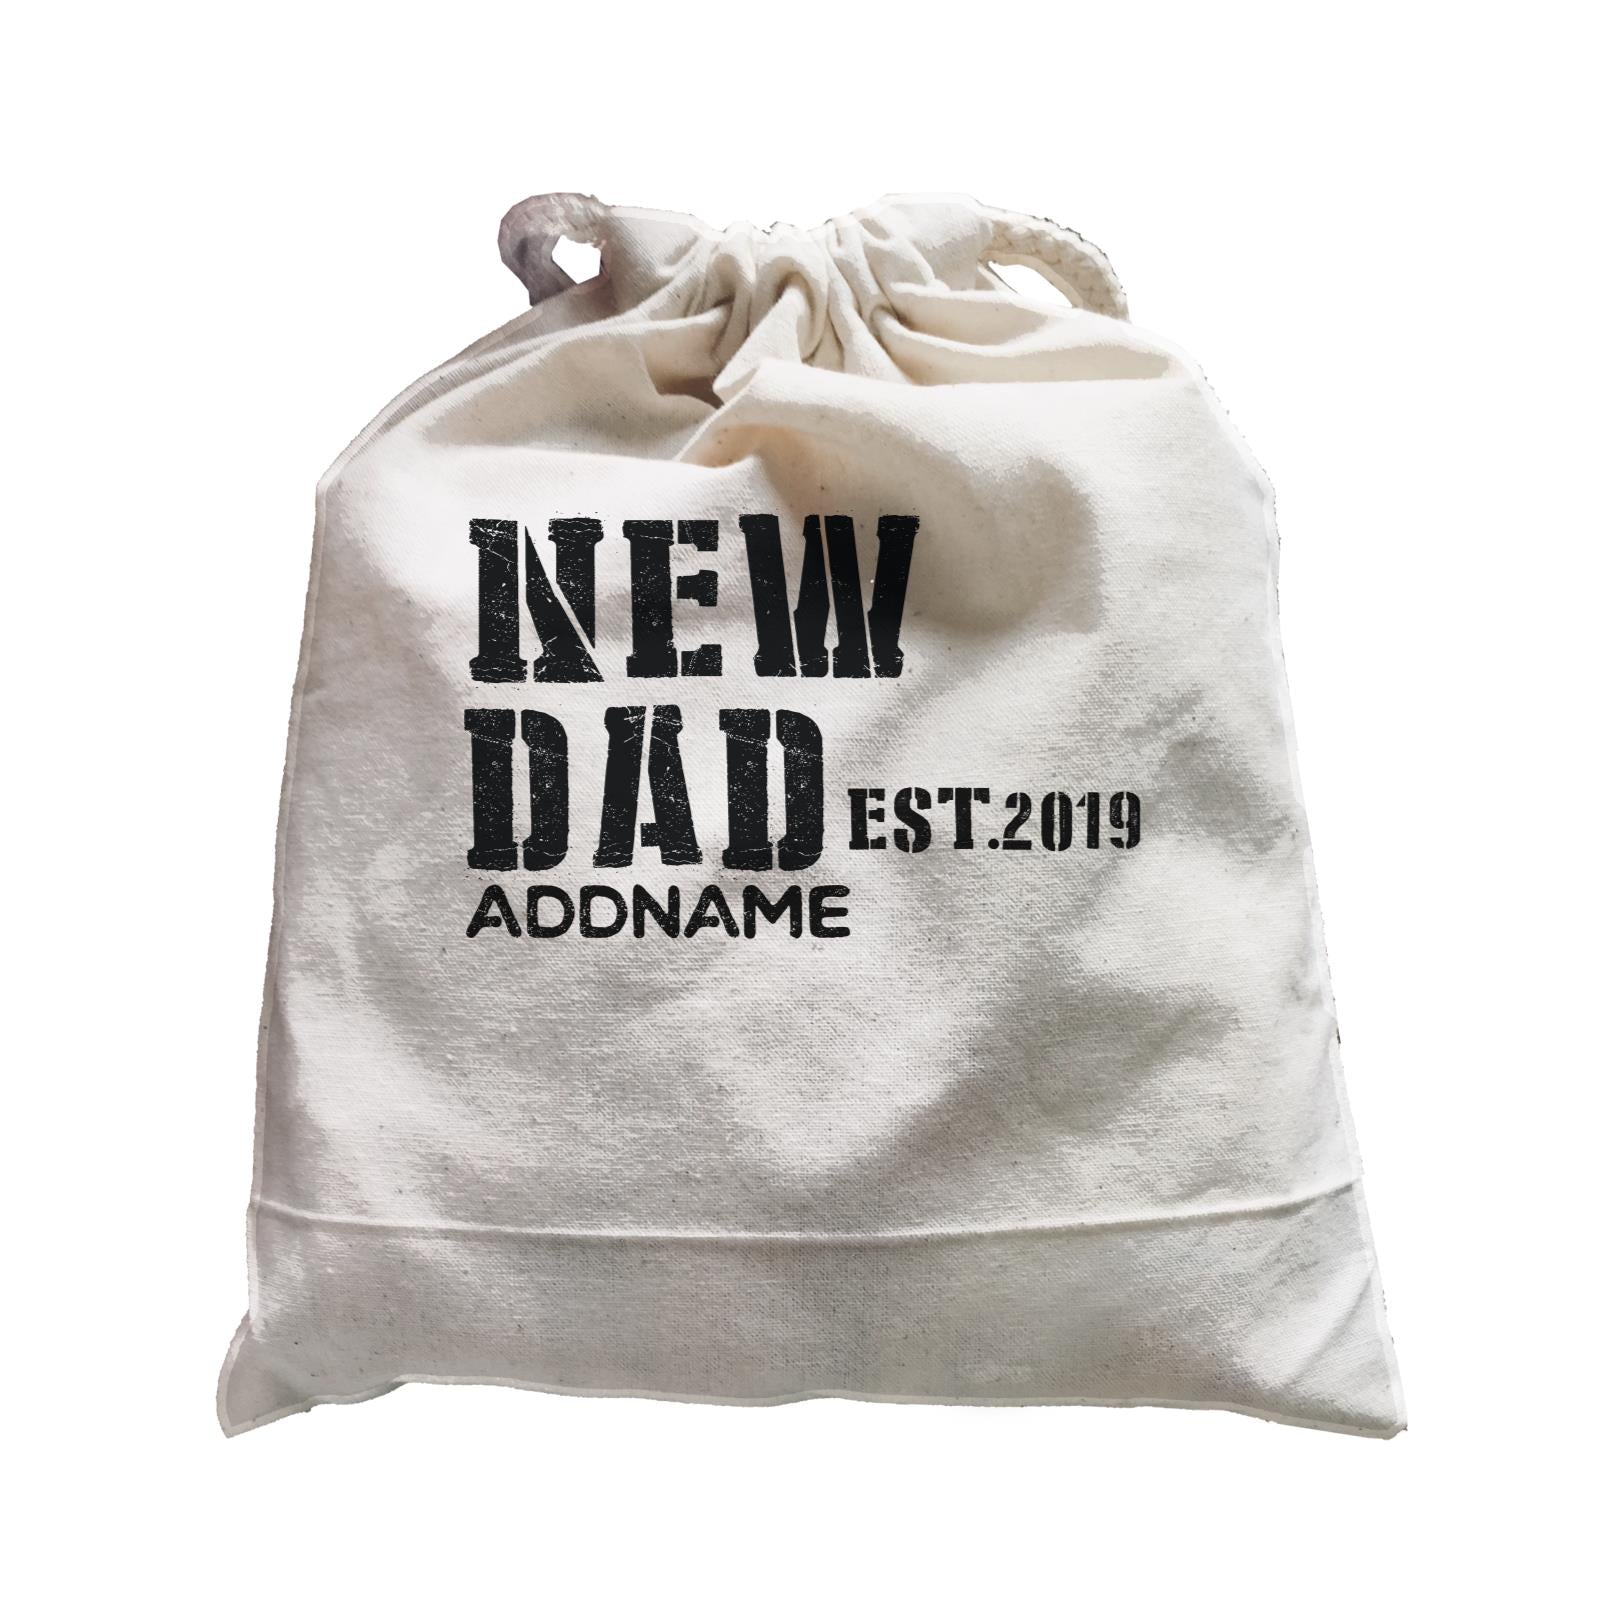 New Parent 1 New Dad Addname With Date Satchel